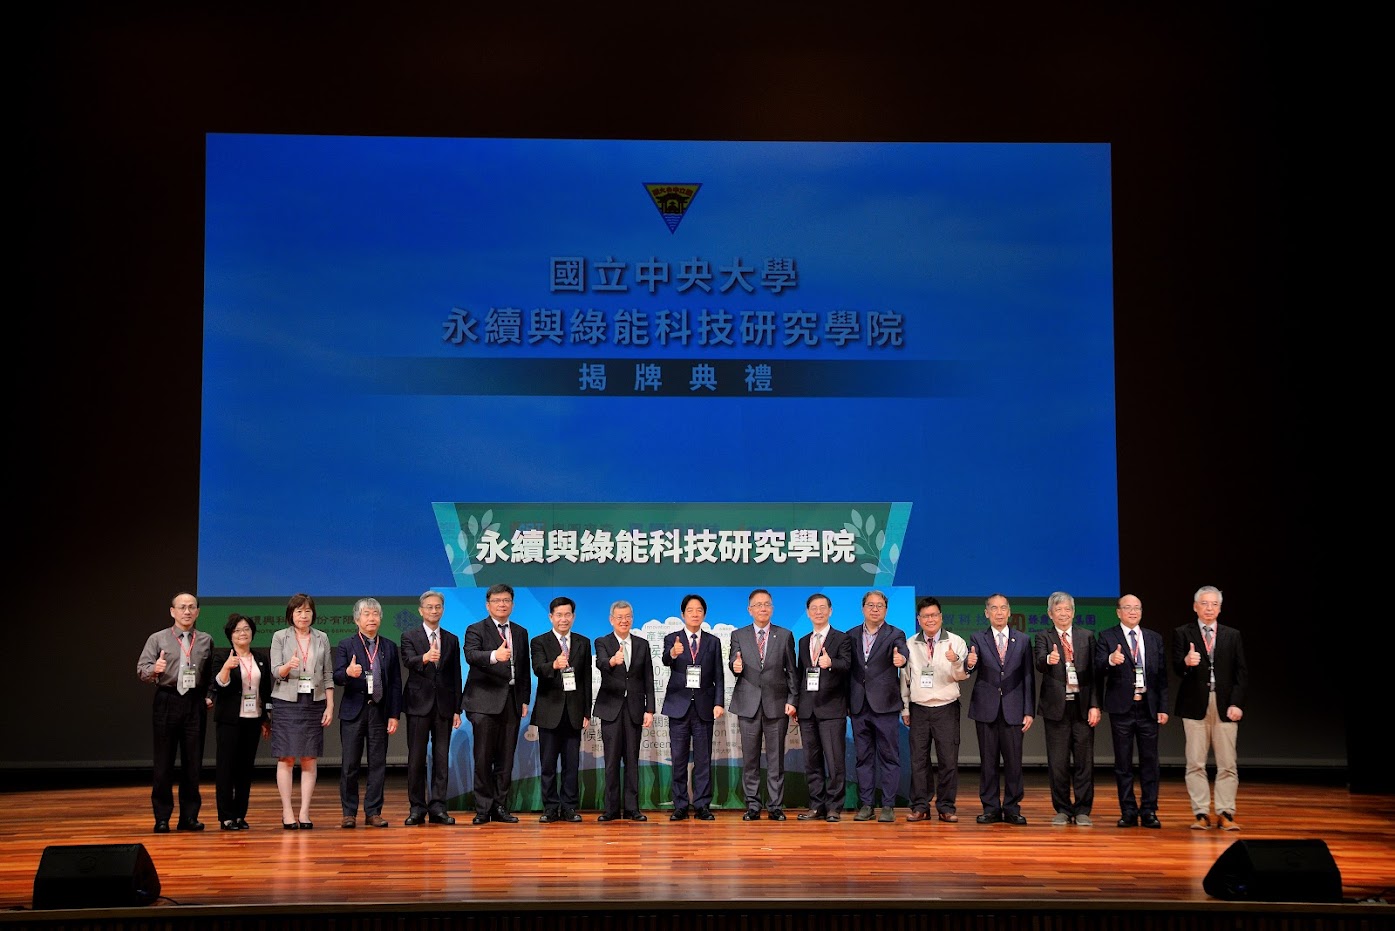 On November 10th, NCU hosted a grand unveiling ceremony for its SAGE, which is a groundbreaking institute in Taiwan. The ceremony was presided over by Vice President Lai Ching-Te, with a gathering of distinguished attendees. Photo courtesy of the Office of Secretariat